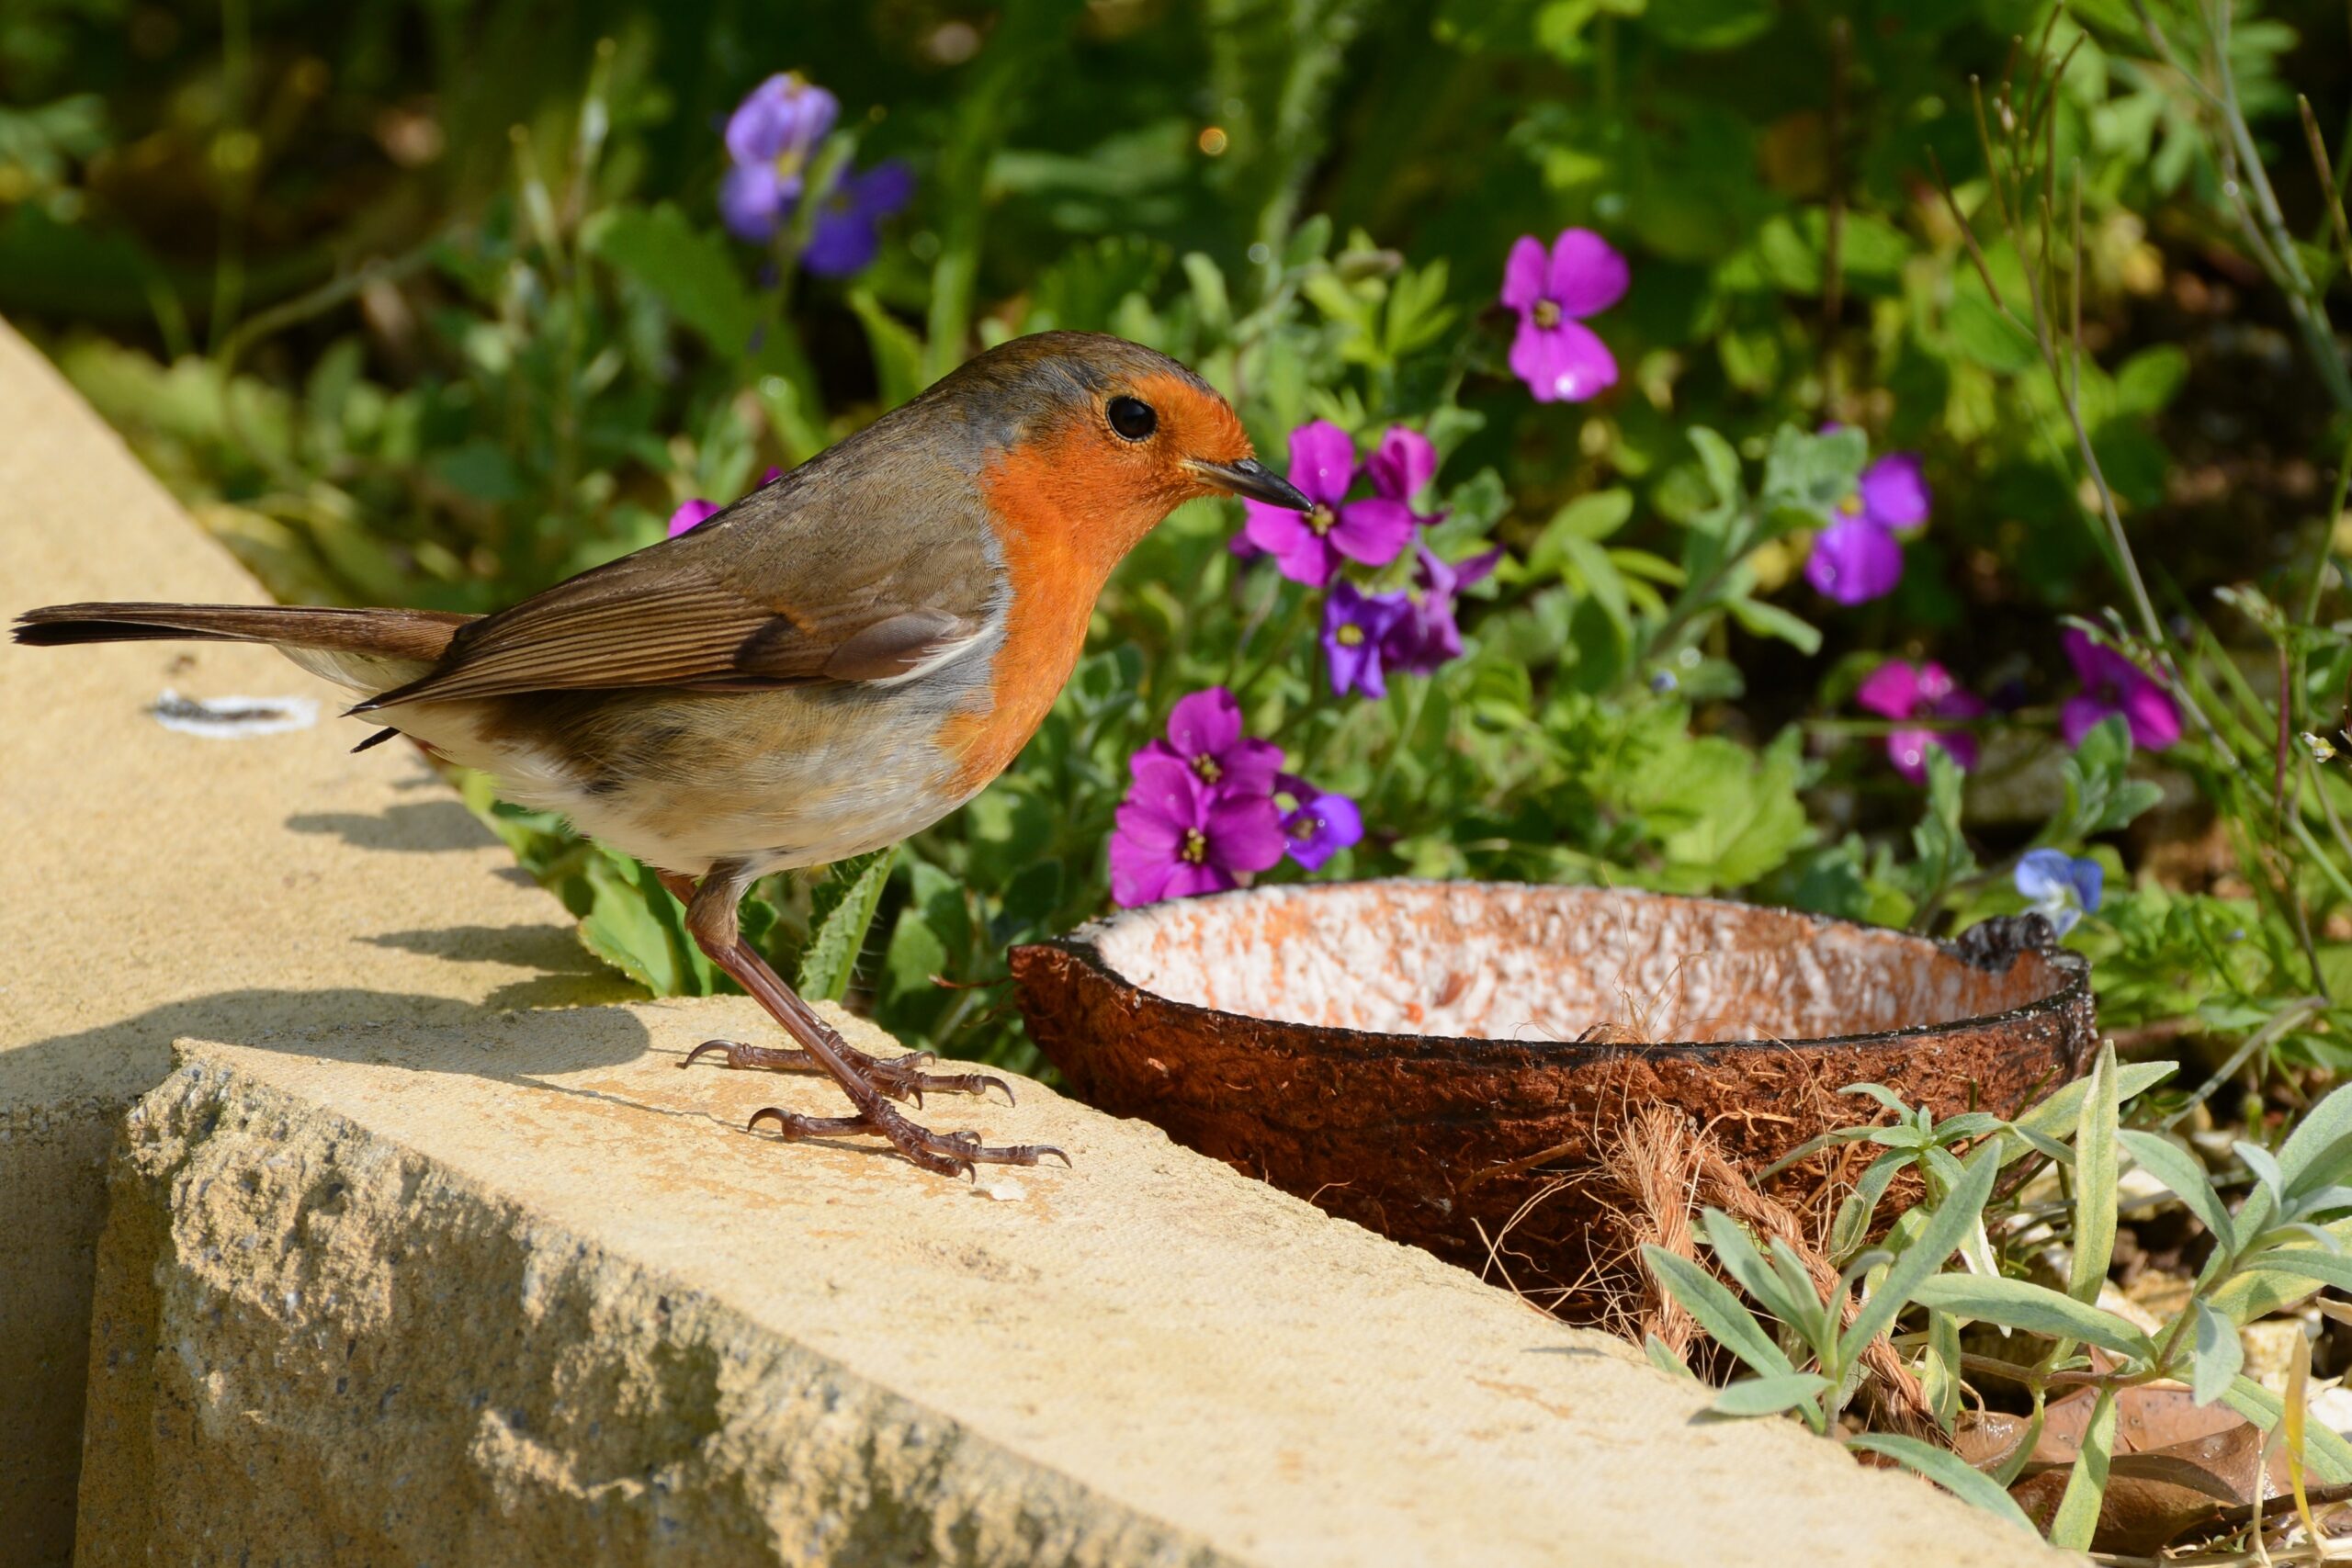 Robin Red Breast with native flowers waiting for the food dish.